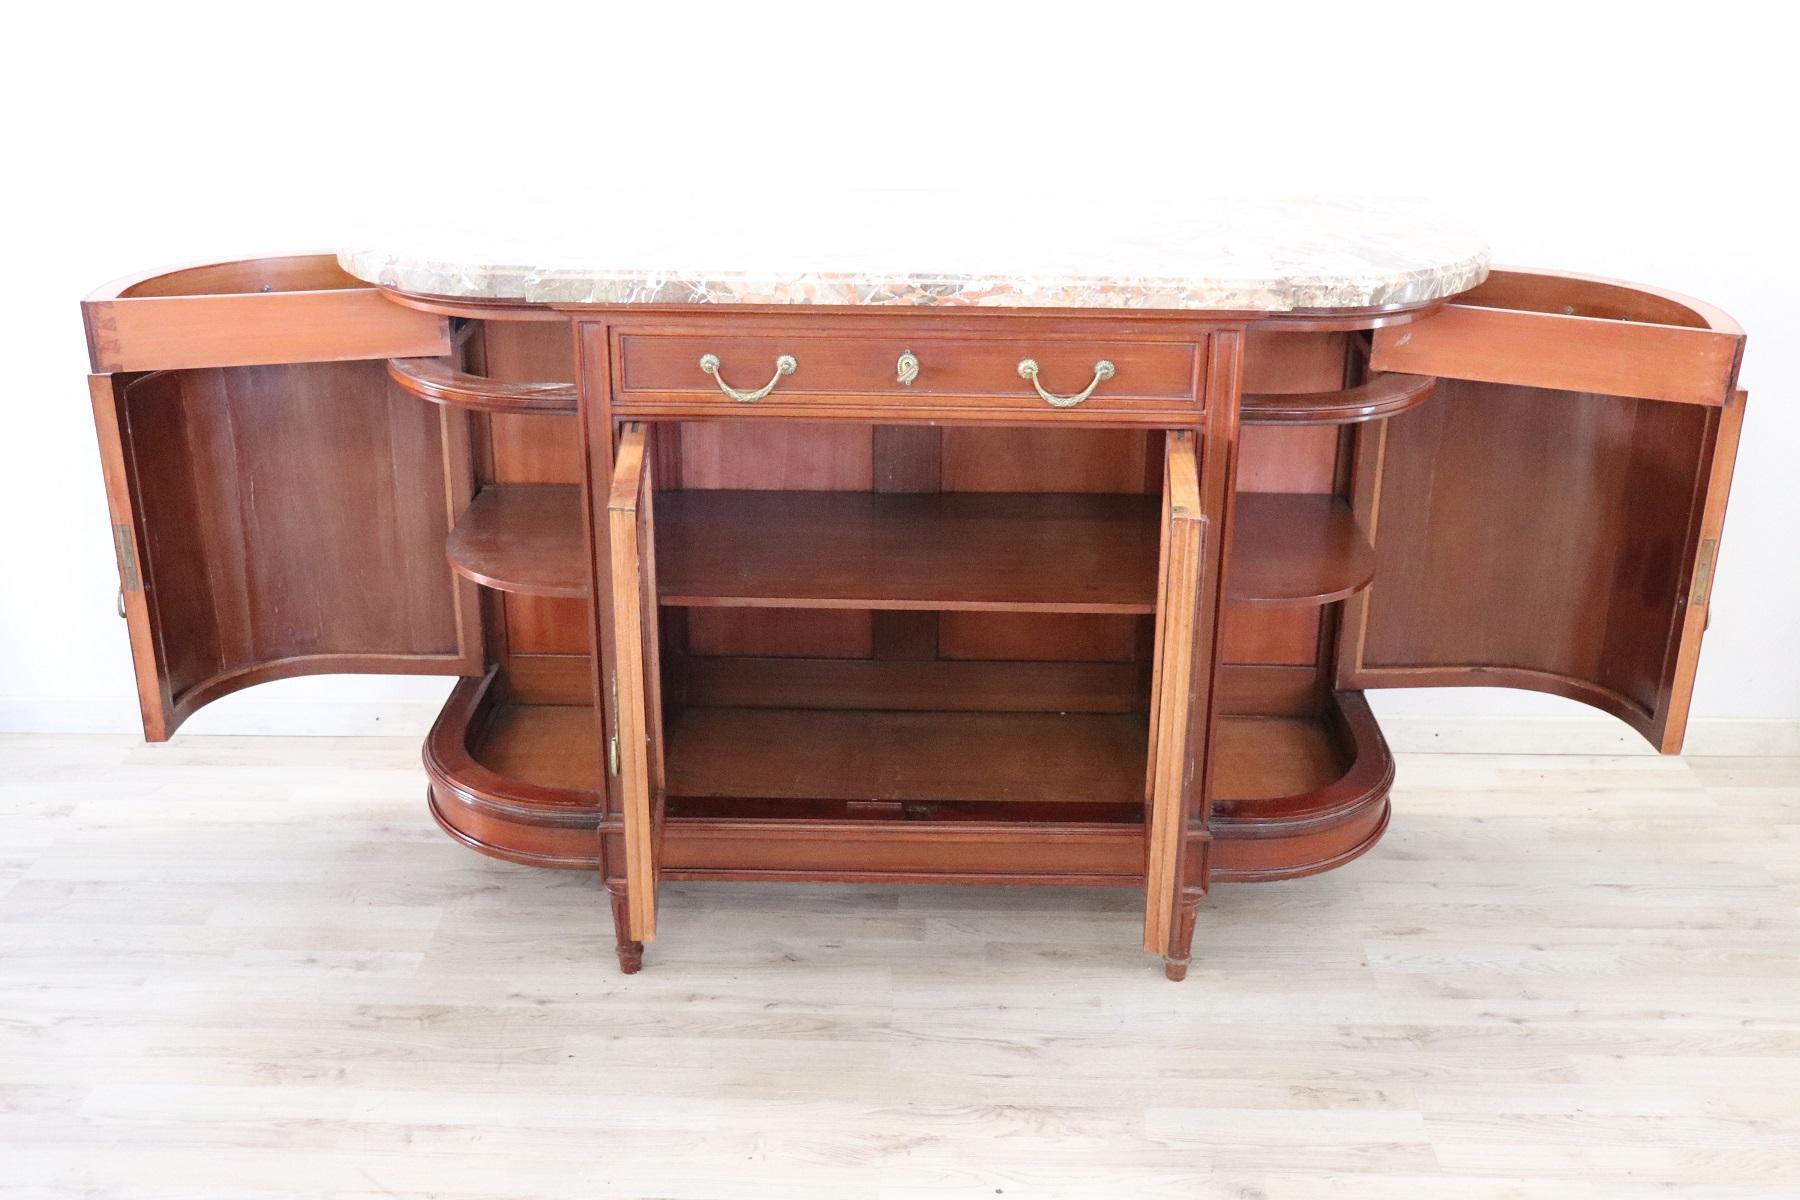 20th Century Italian Neoclassical Style Inlaid Cherrywood Sideboard or Buffet 8